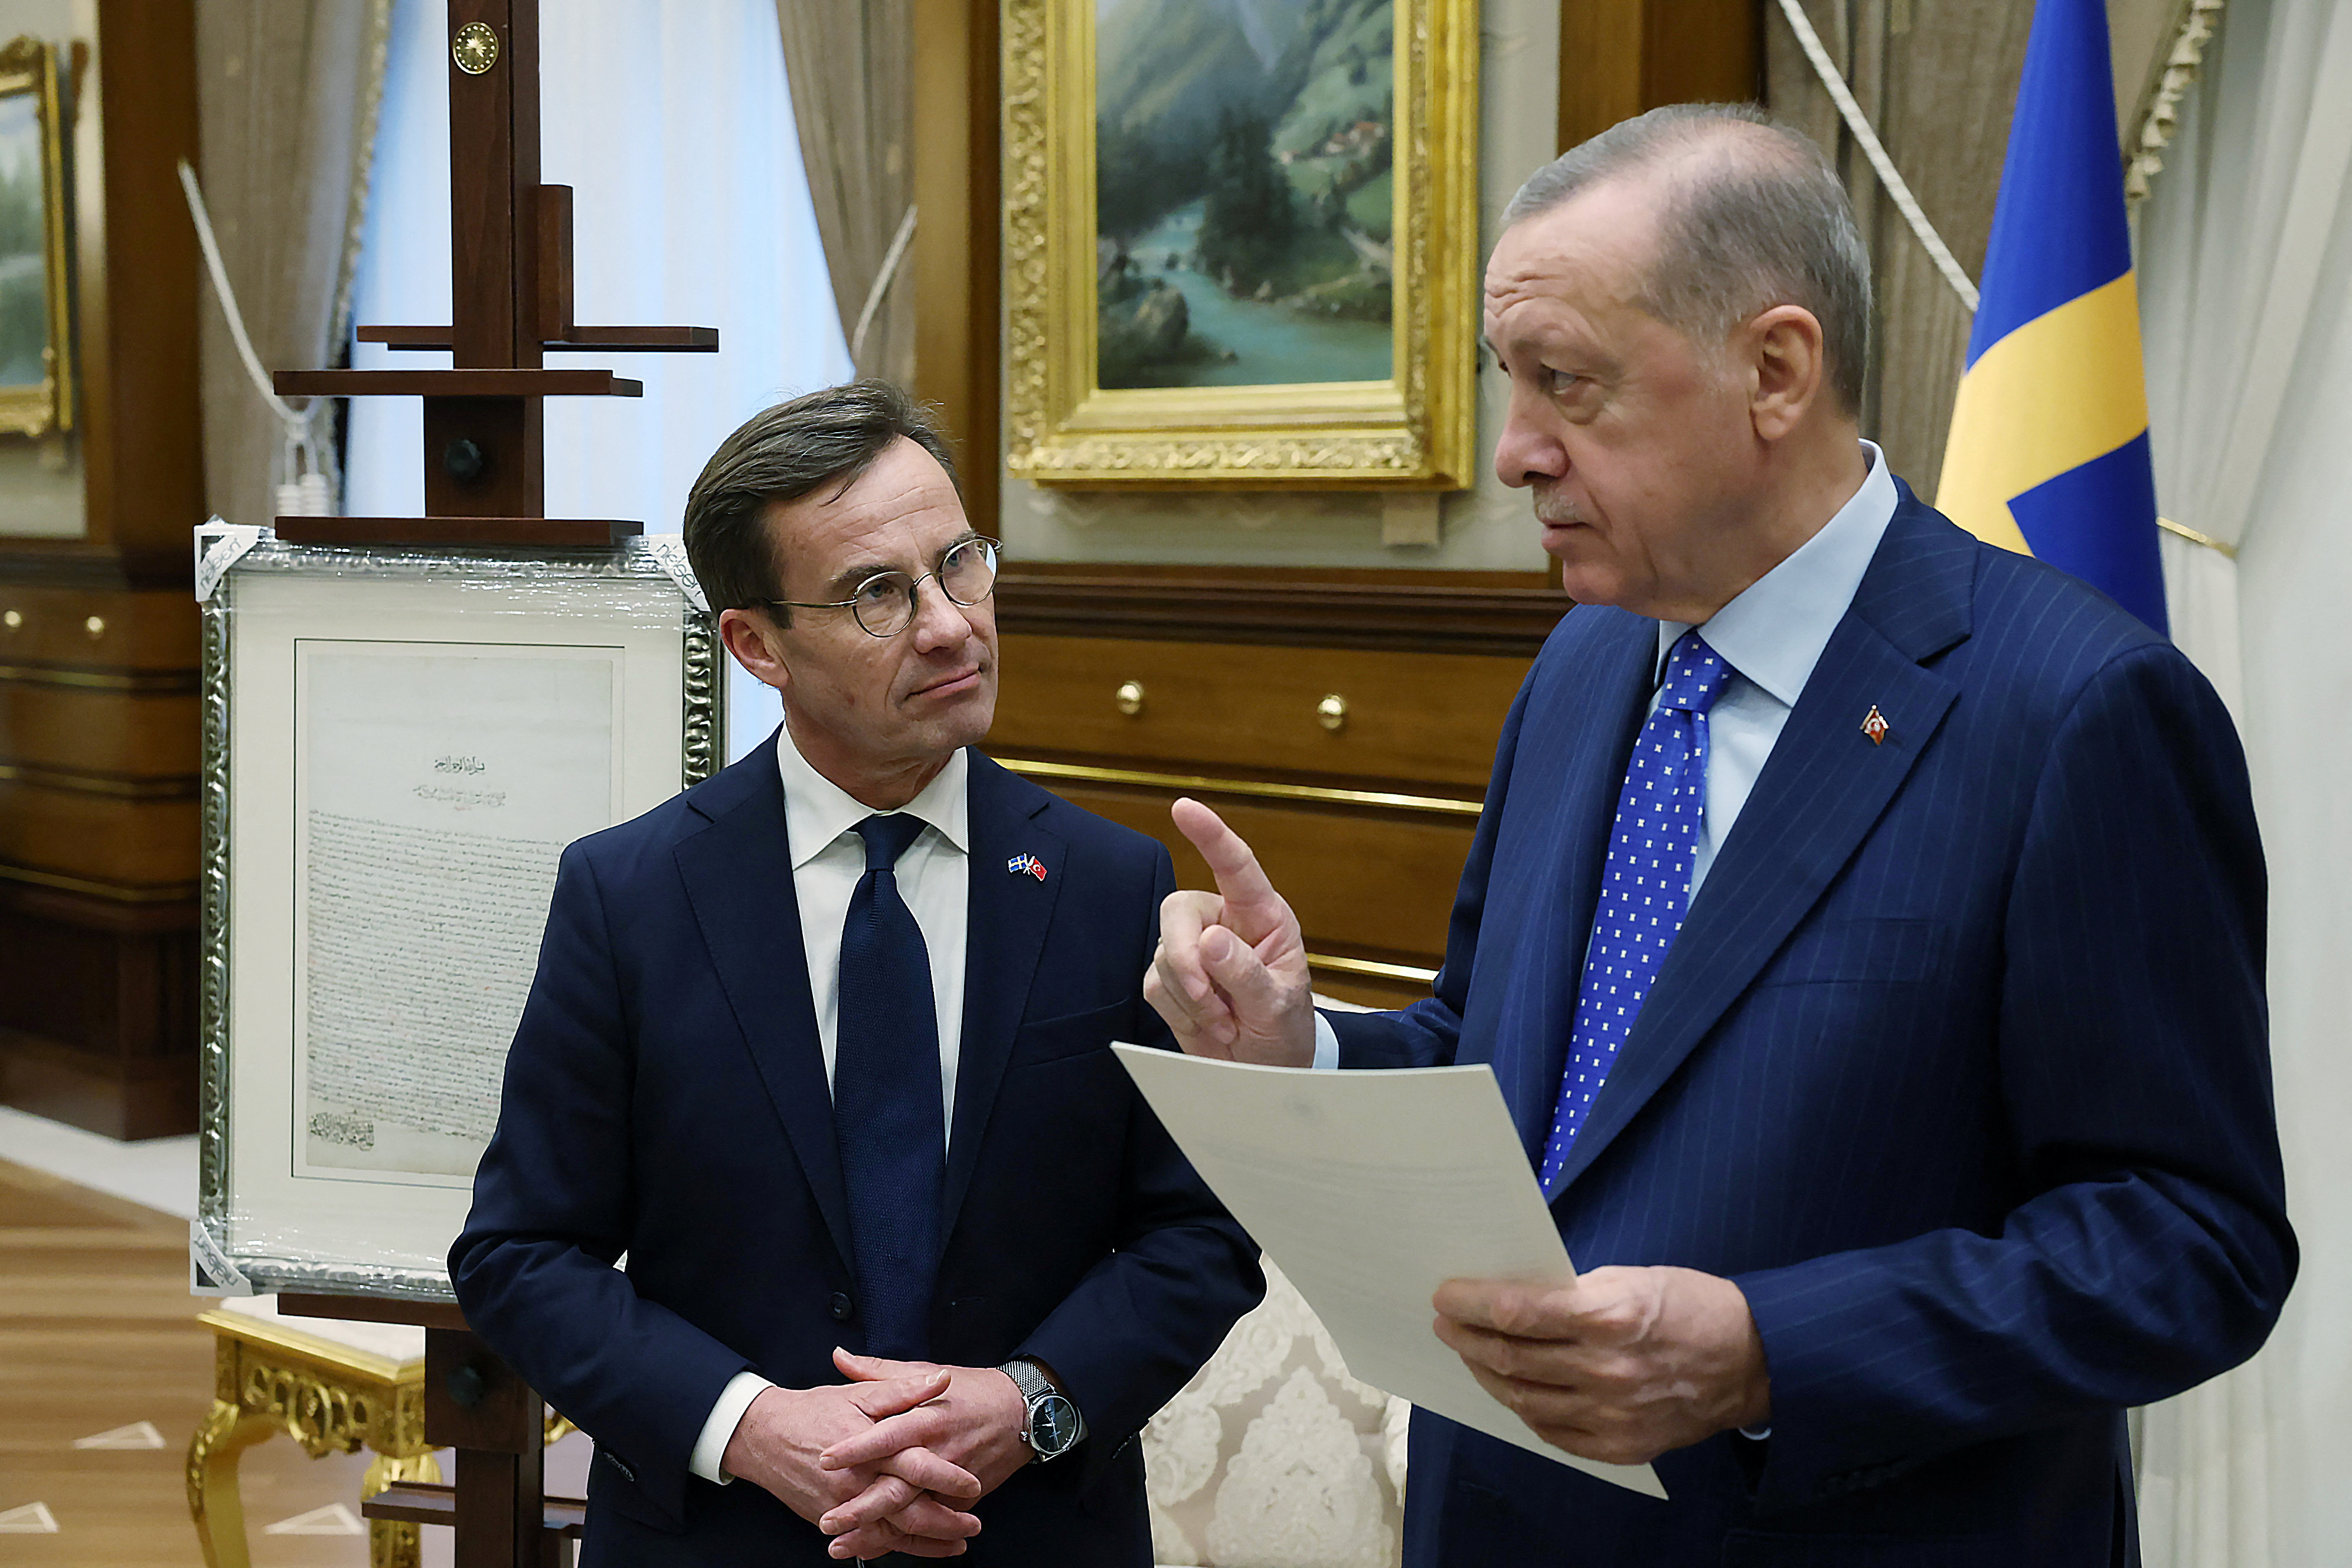 File image of Turkish President Tayyip Erdogan and Swedish Prime Minister Ulf Kristersson (Reuters)